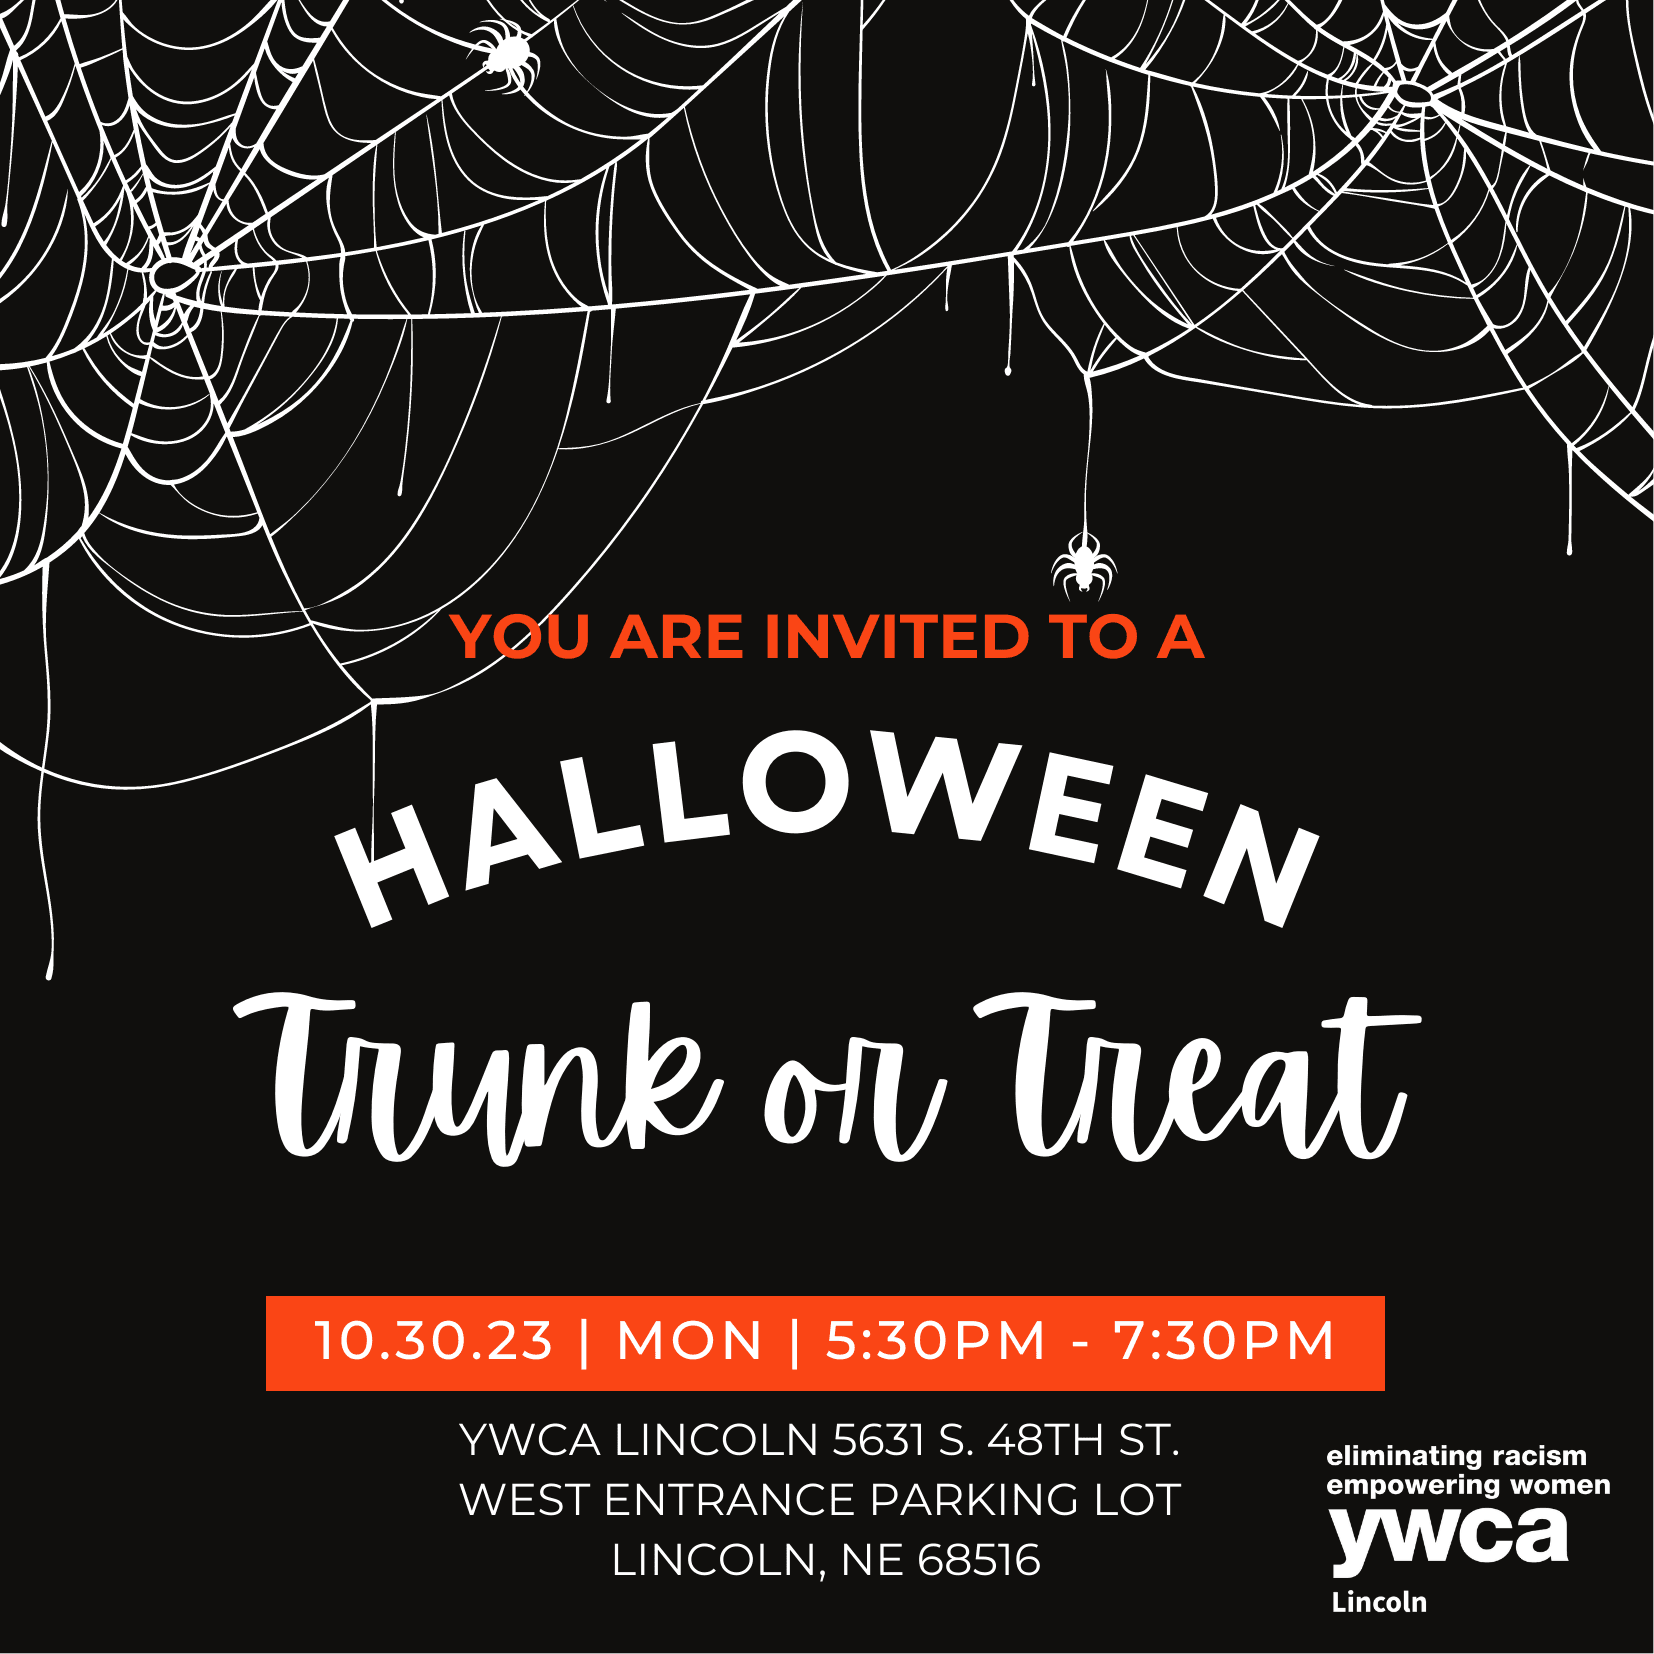 YWCA Lincoln's Trunk or Treat